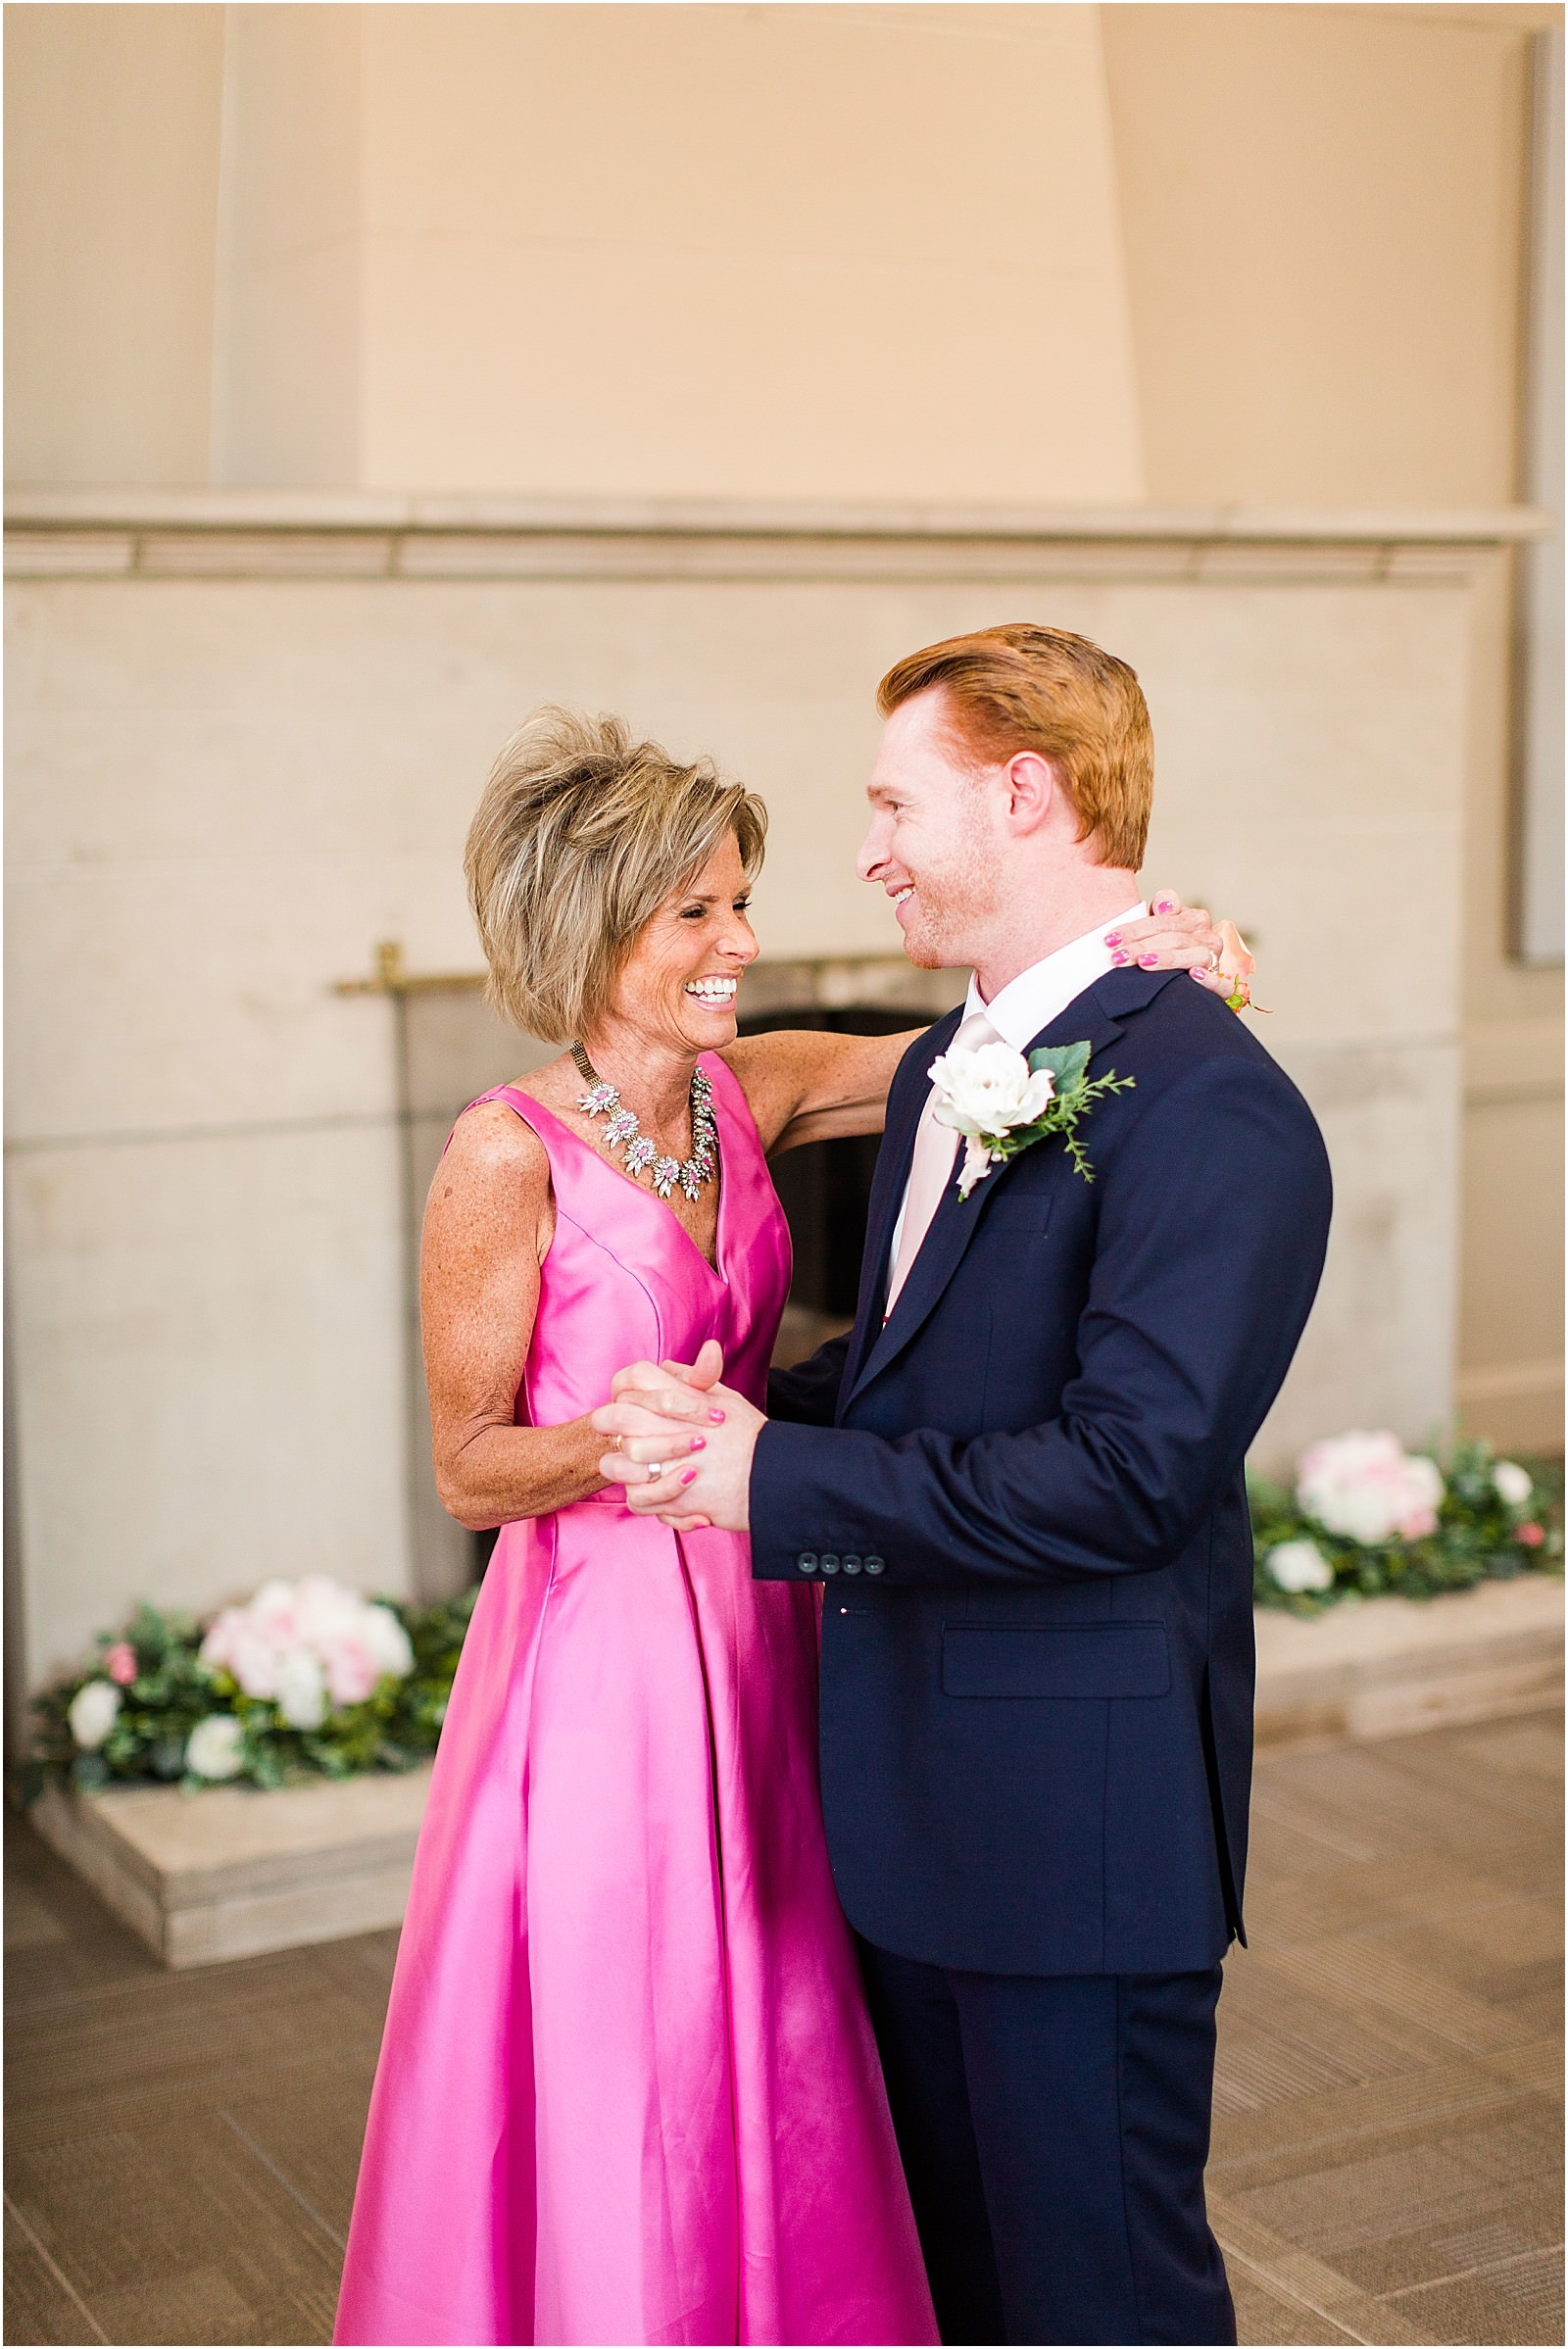 A Perfectly Intimate Wedding in Downtown Evansville Indiana | Jennah and Steve | Bret and Brandie Photography | | 0093.jpg